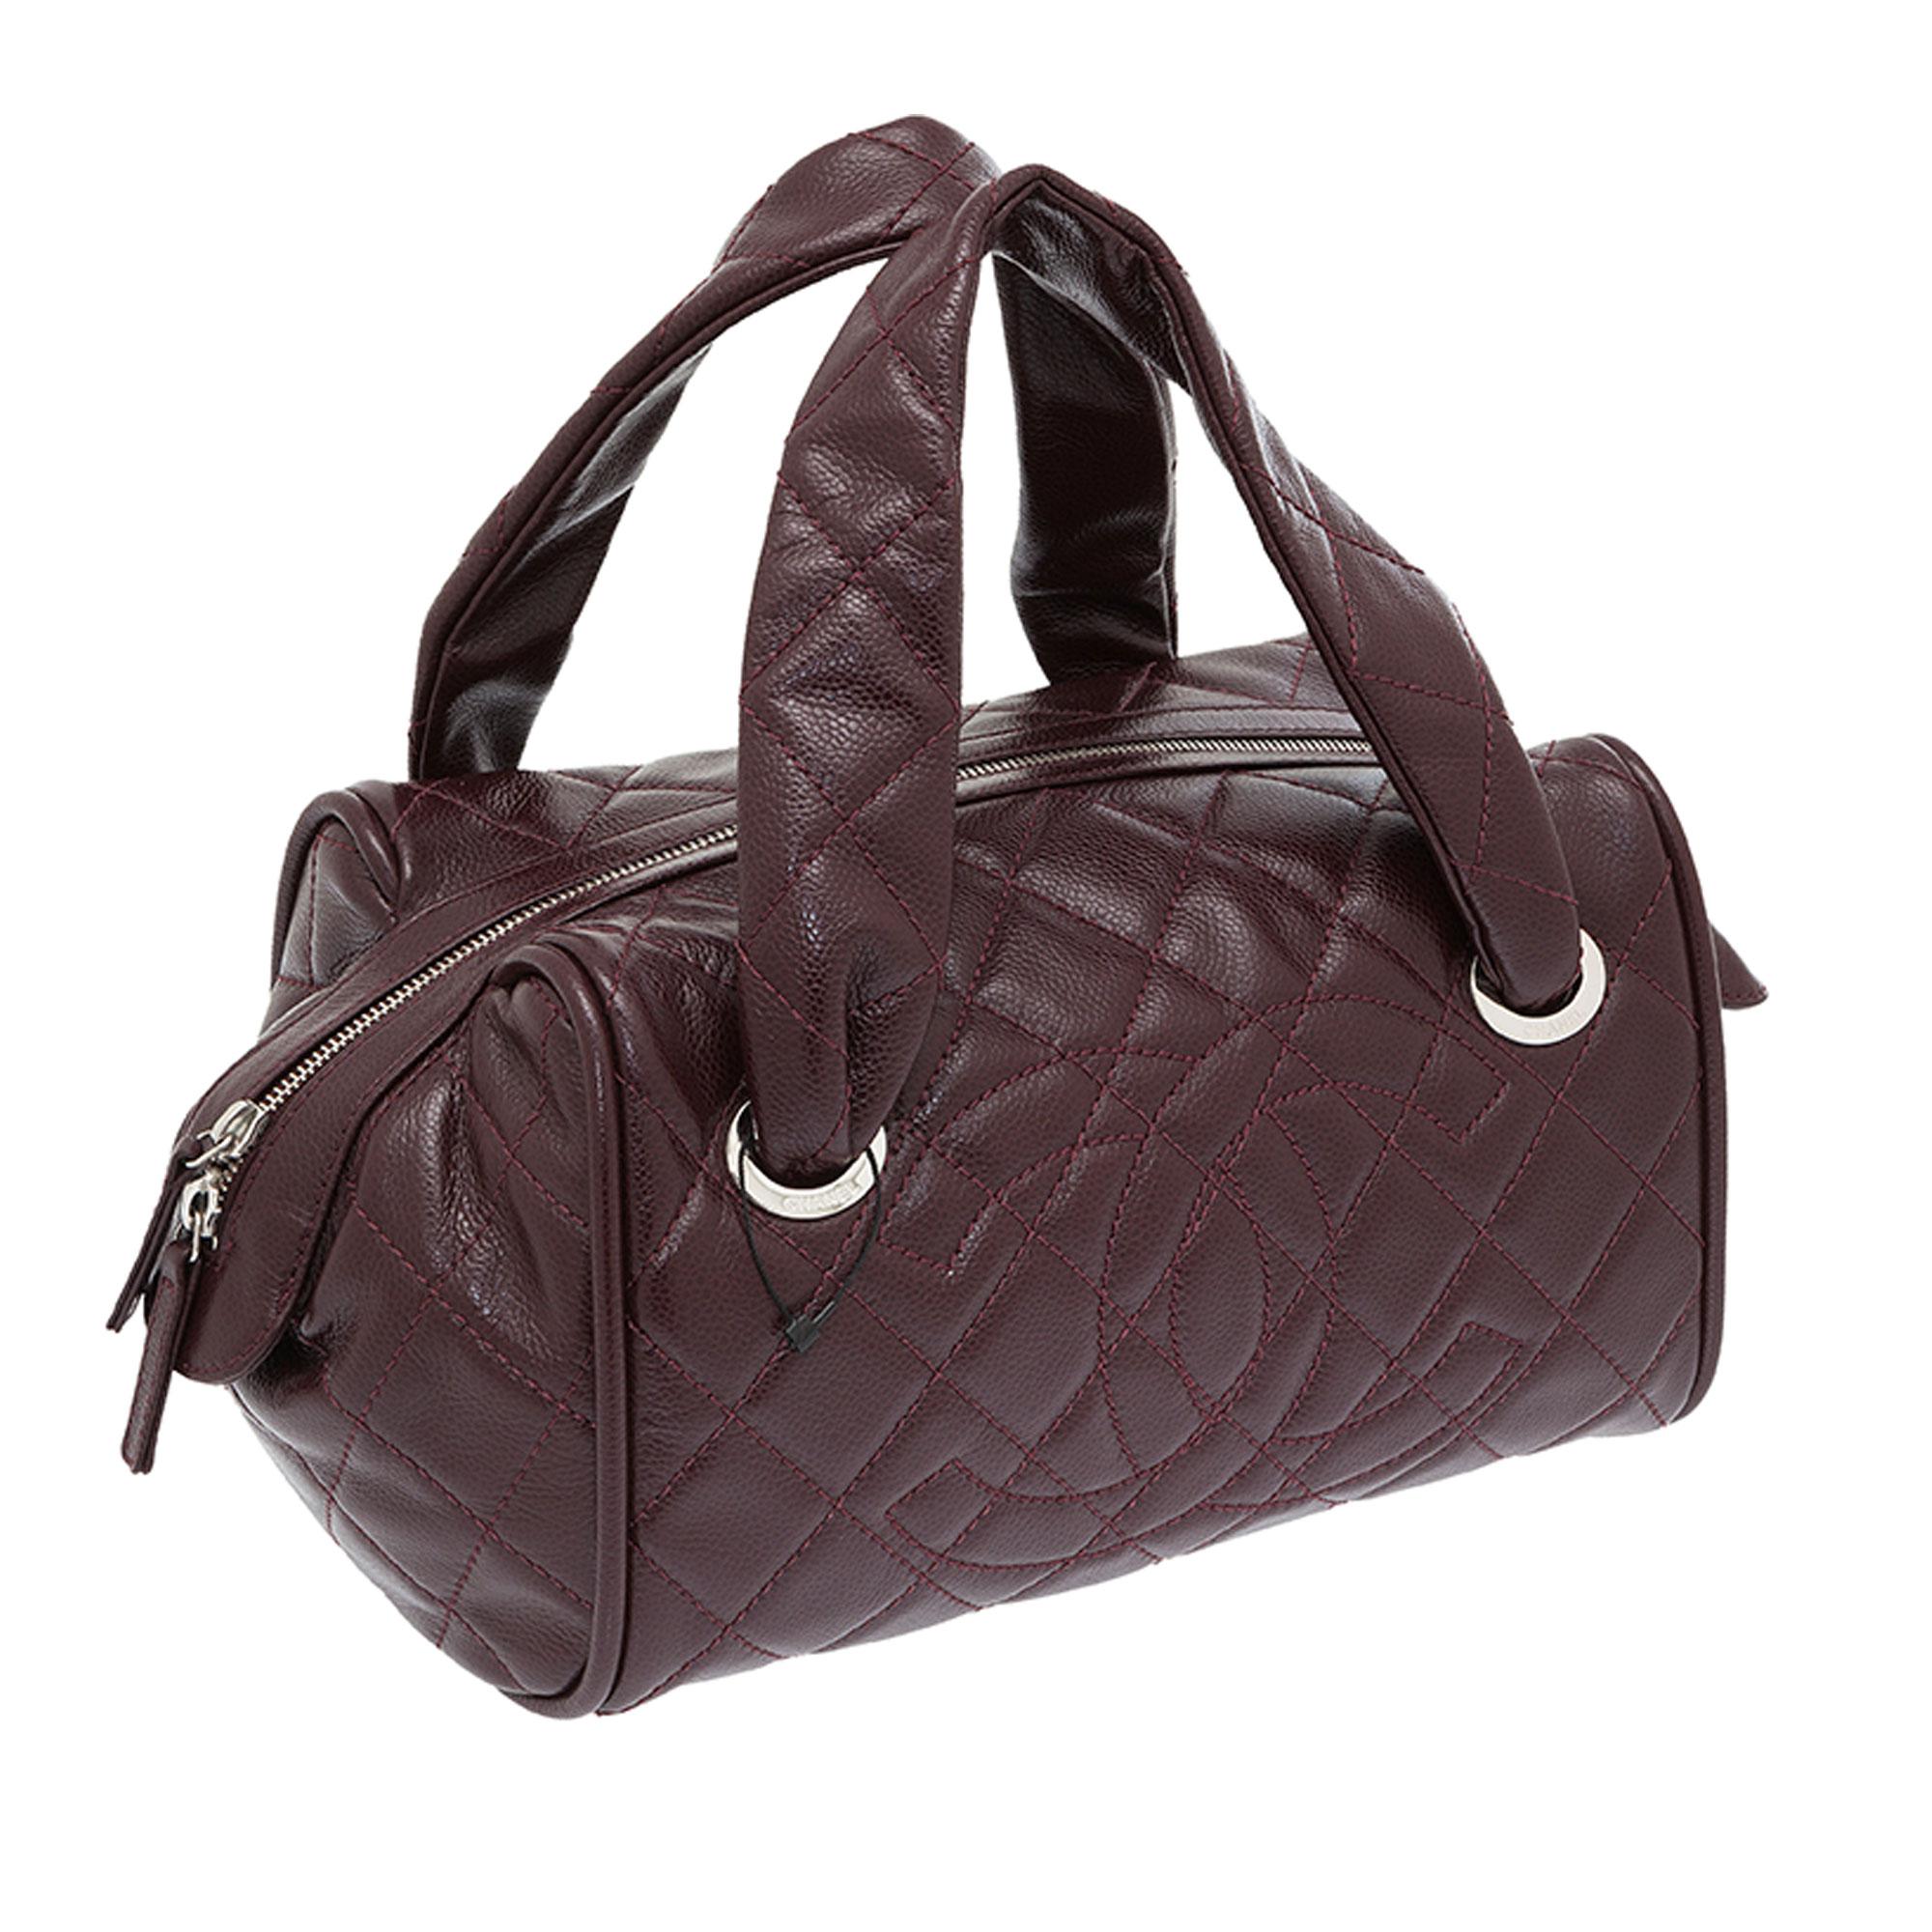 Chanel 2006 Quilted Caviar Burgundy CC Kelly Top Handle Boston Satchel Tote Bag  In Good Condition For Sale In Miami, FL